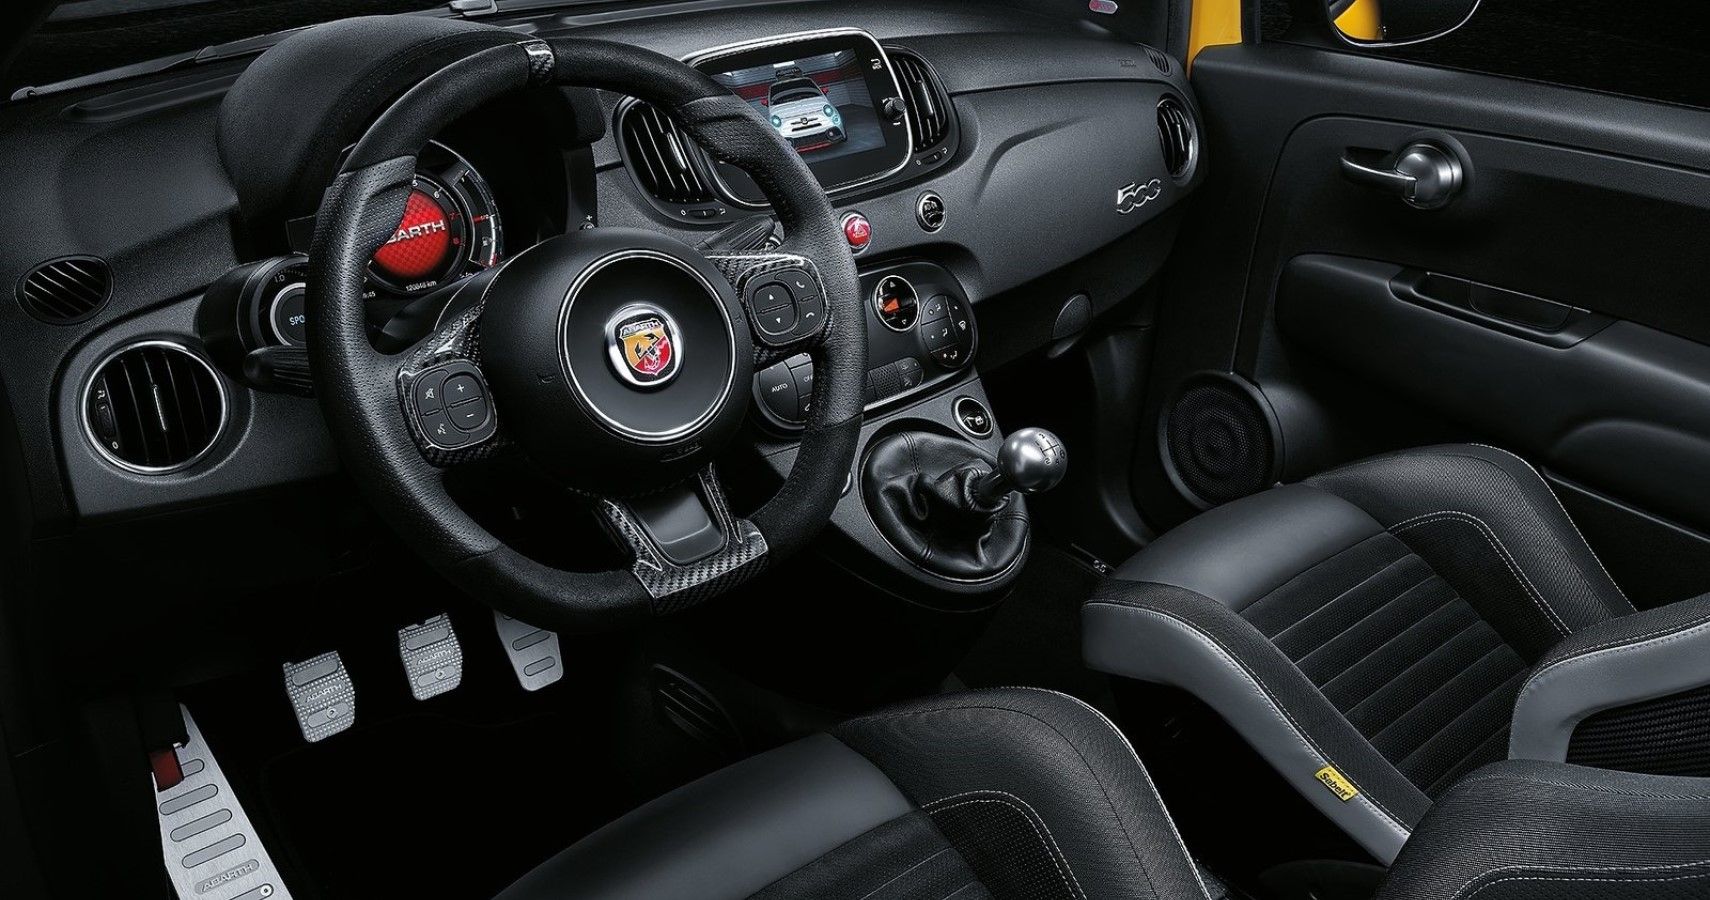 Fiat 500 Abarth gets a scorpion on the steering wheel